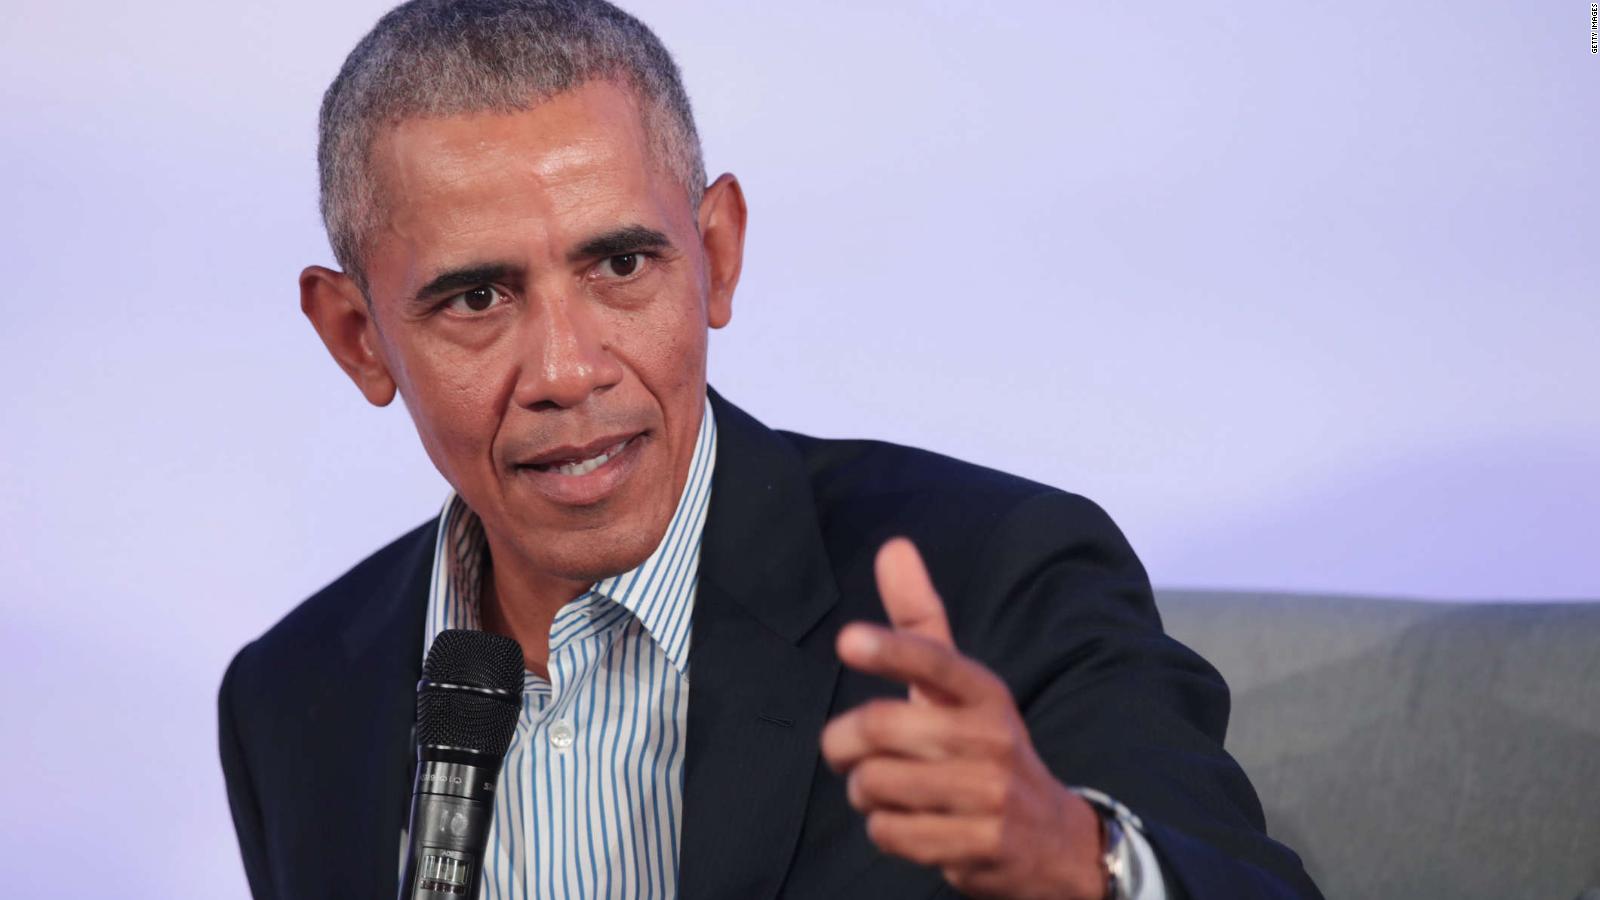 Obama’s Strong Message on Israel-Palestine Conflict